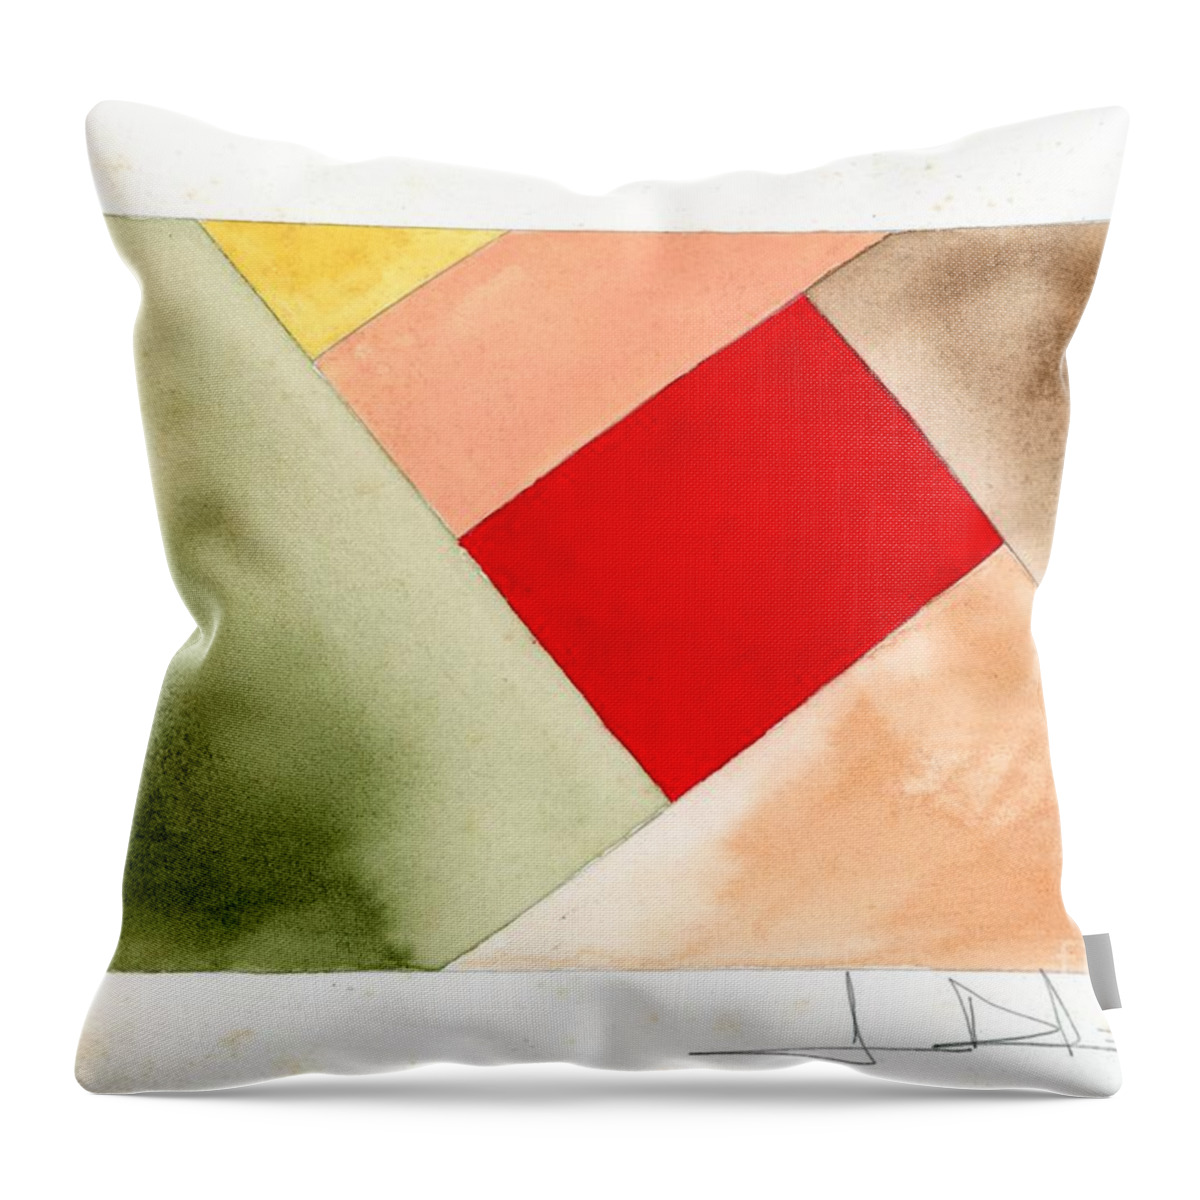 Architecture Throw Pillow featuring the photograph Red Square Tanned by George D Gordon III